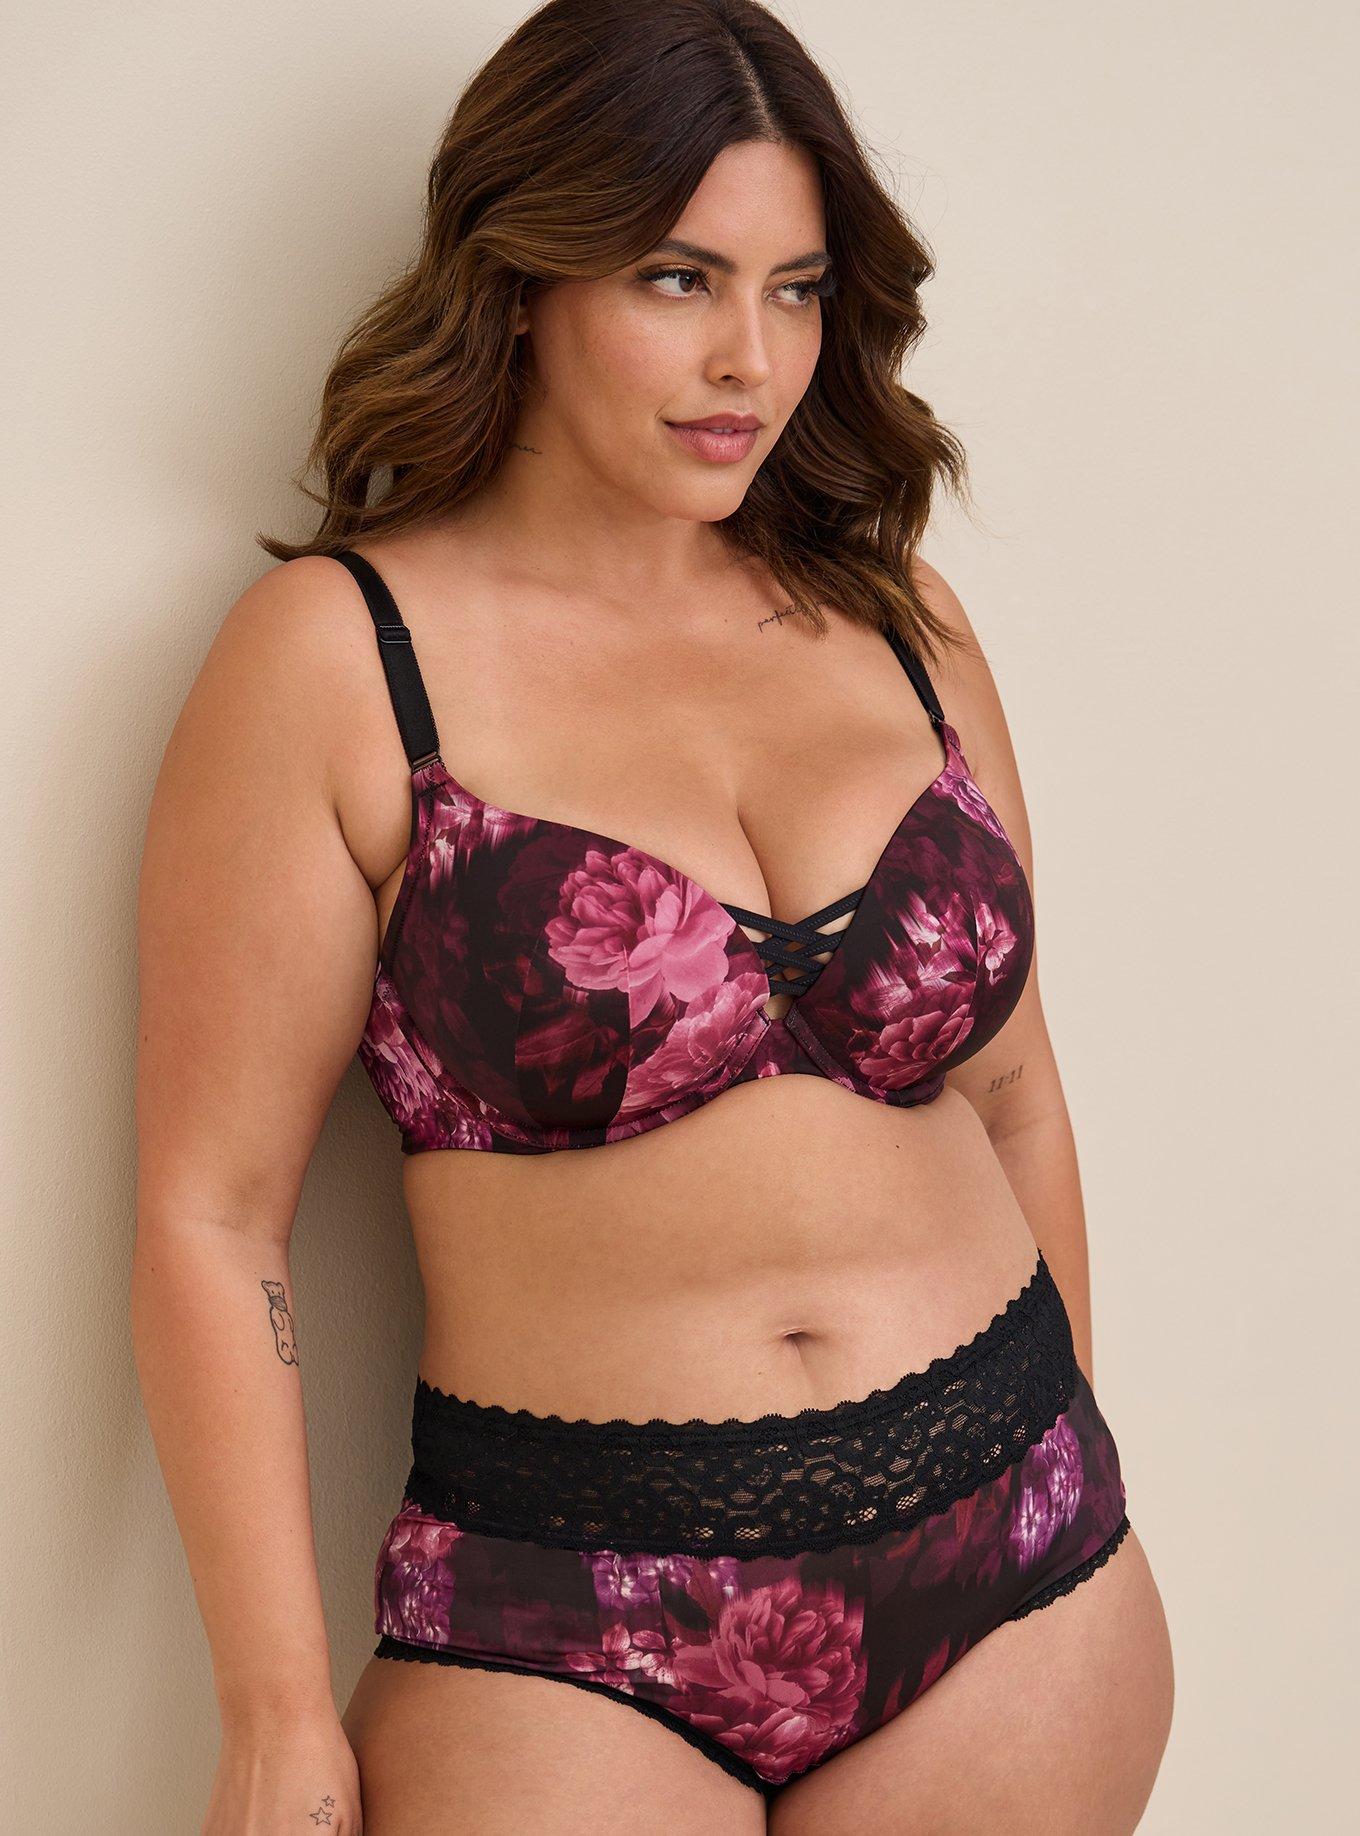 Womens Plus Size Micro Cheeky Underwear with Lace - Togo